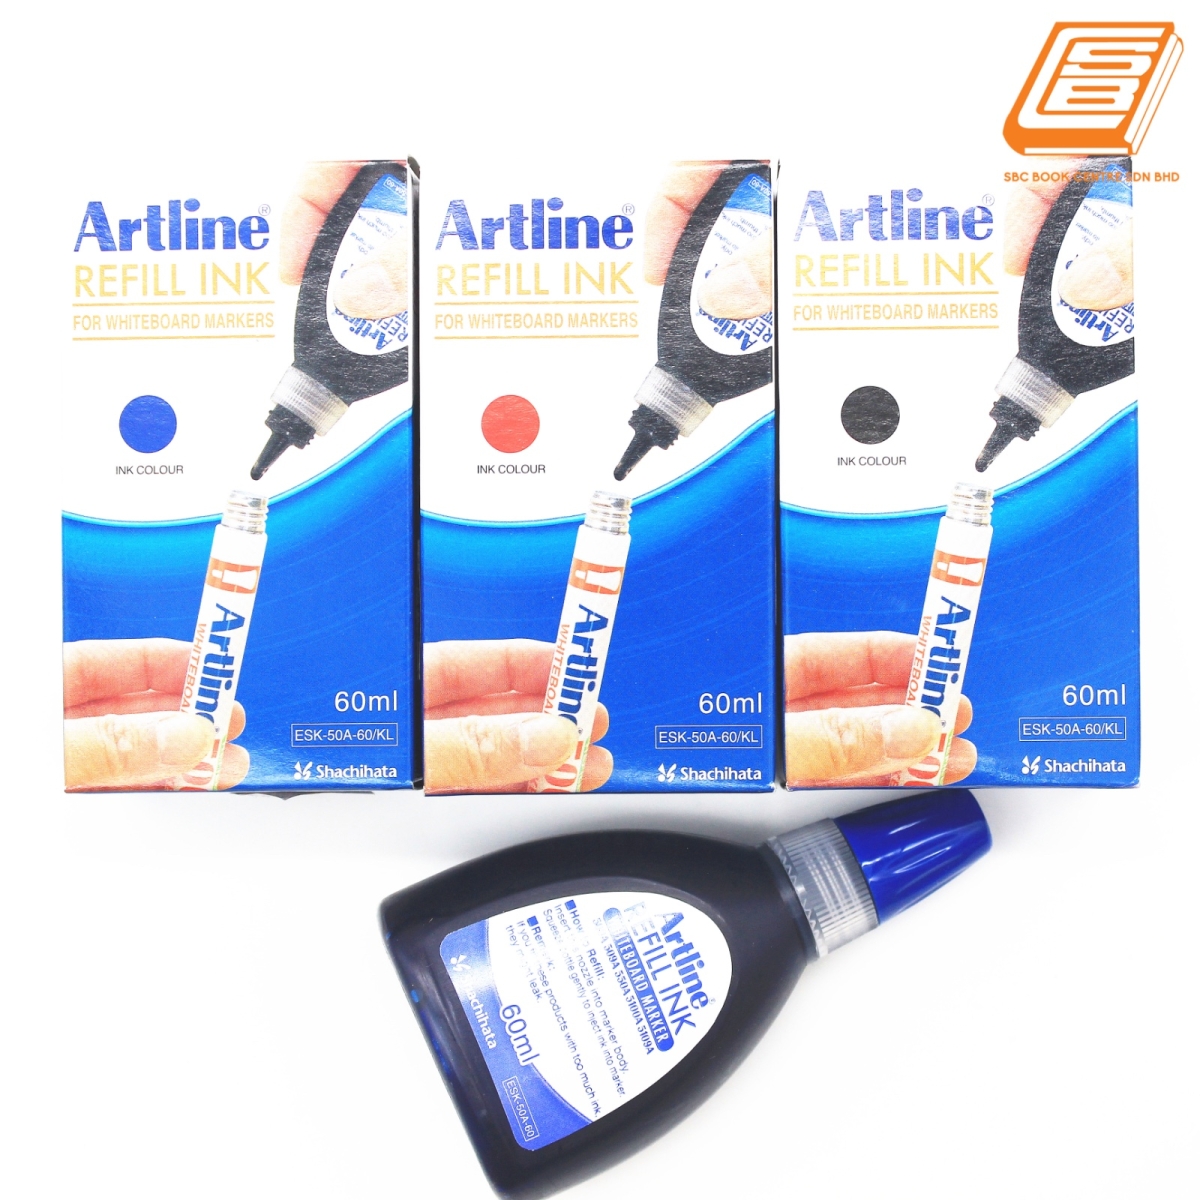 Artline Whiteboard Marker Refill Ink 60ml Esk 50a 60 Pen And Pencil Stationery Supplier Retailer Supply